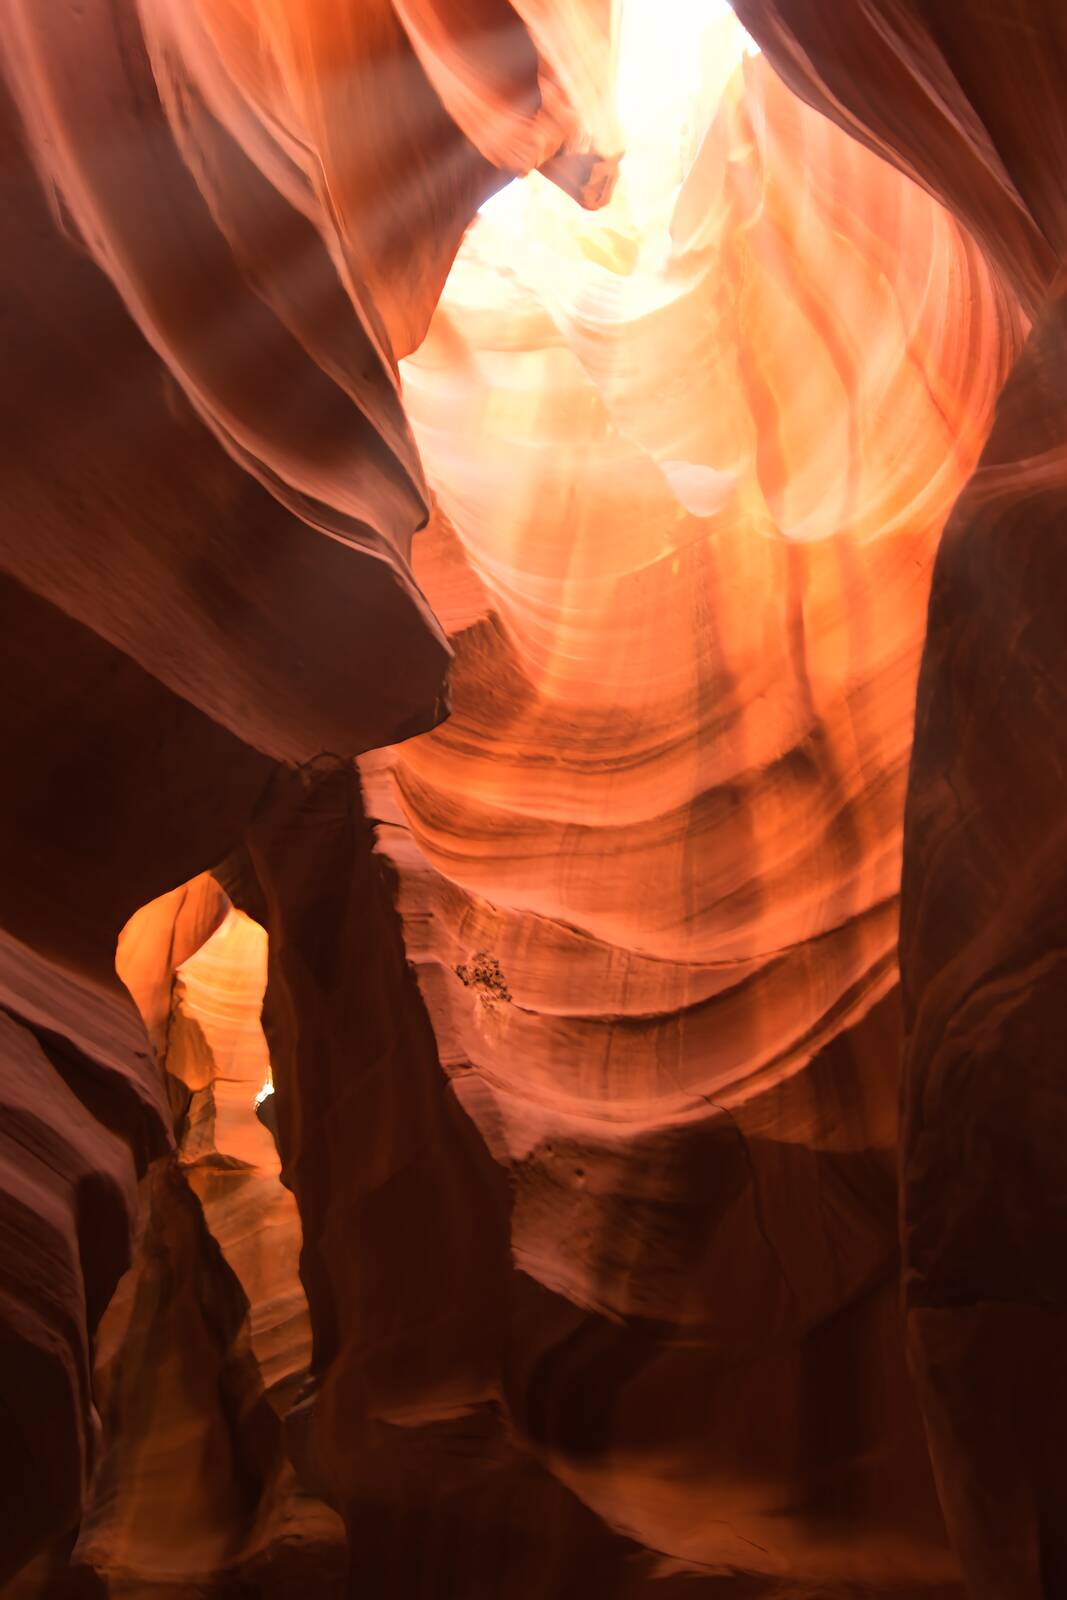 Image of Upper Antelope Canyon by Steve West